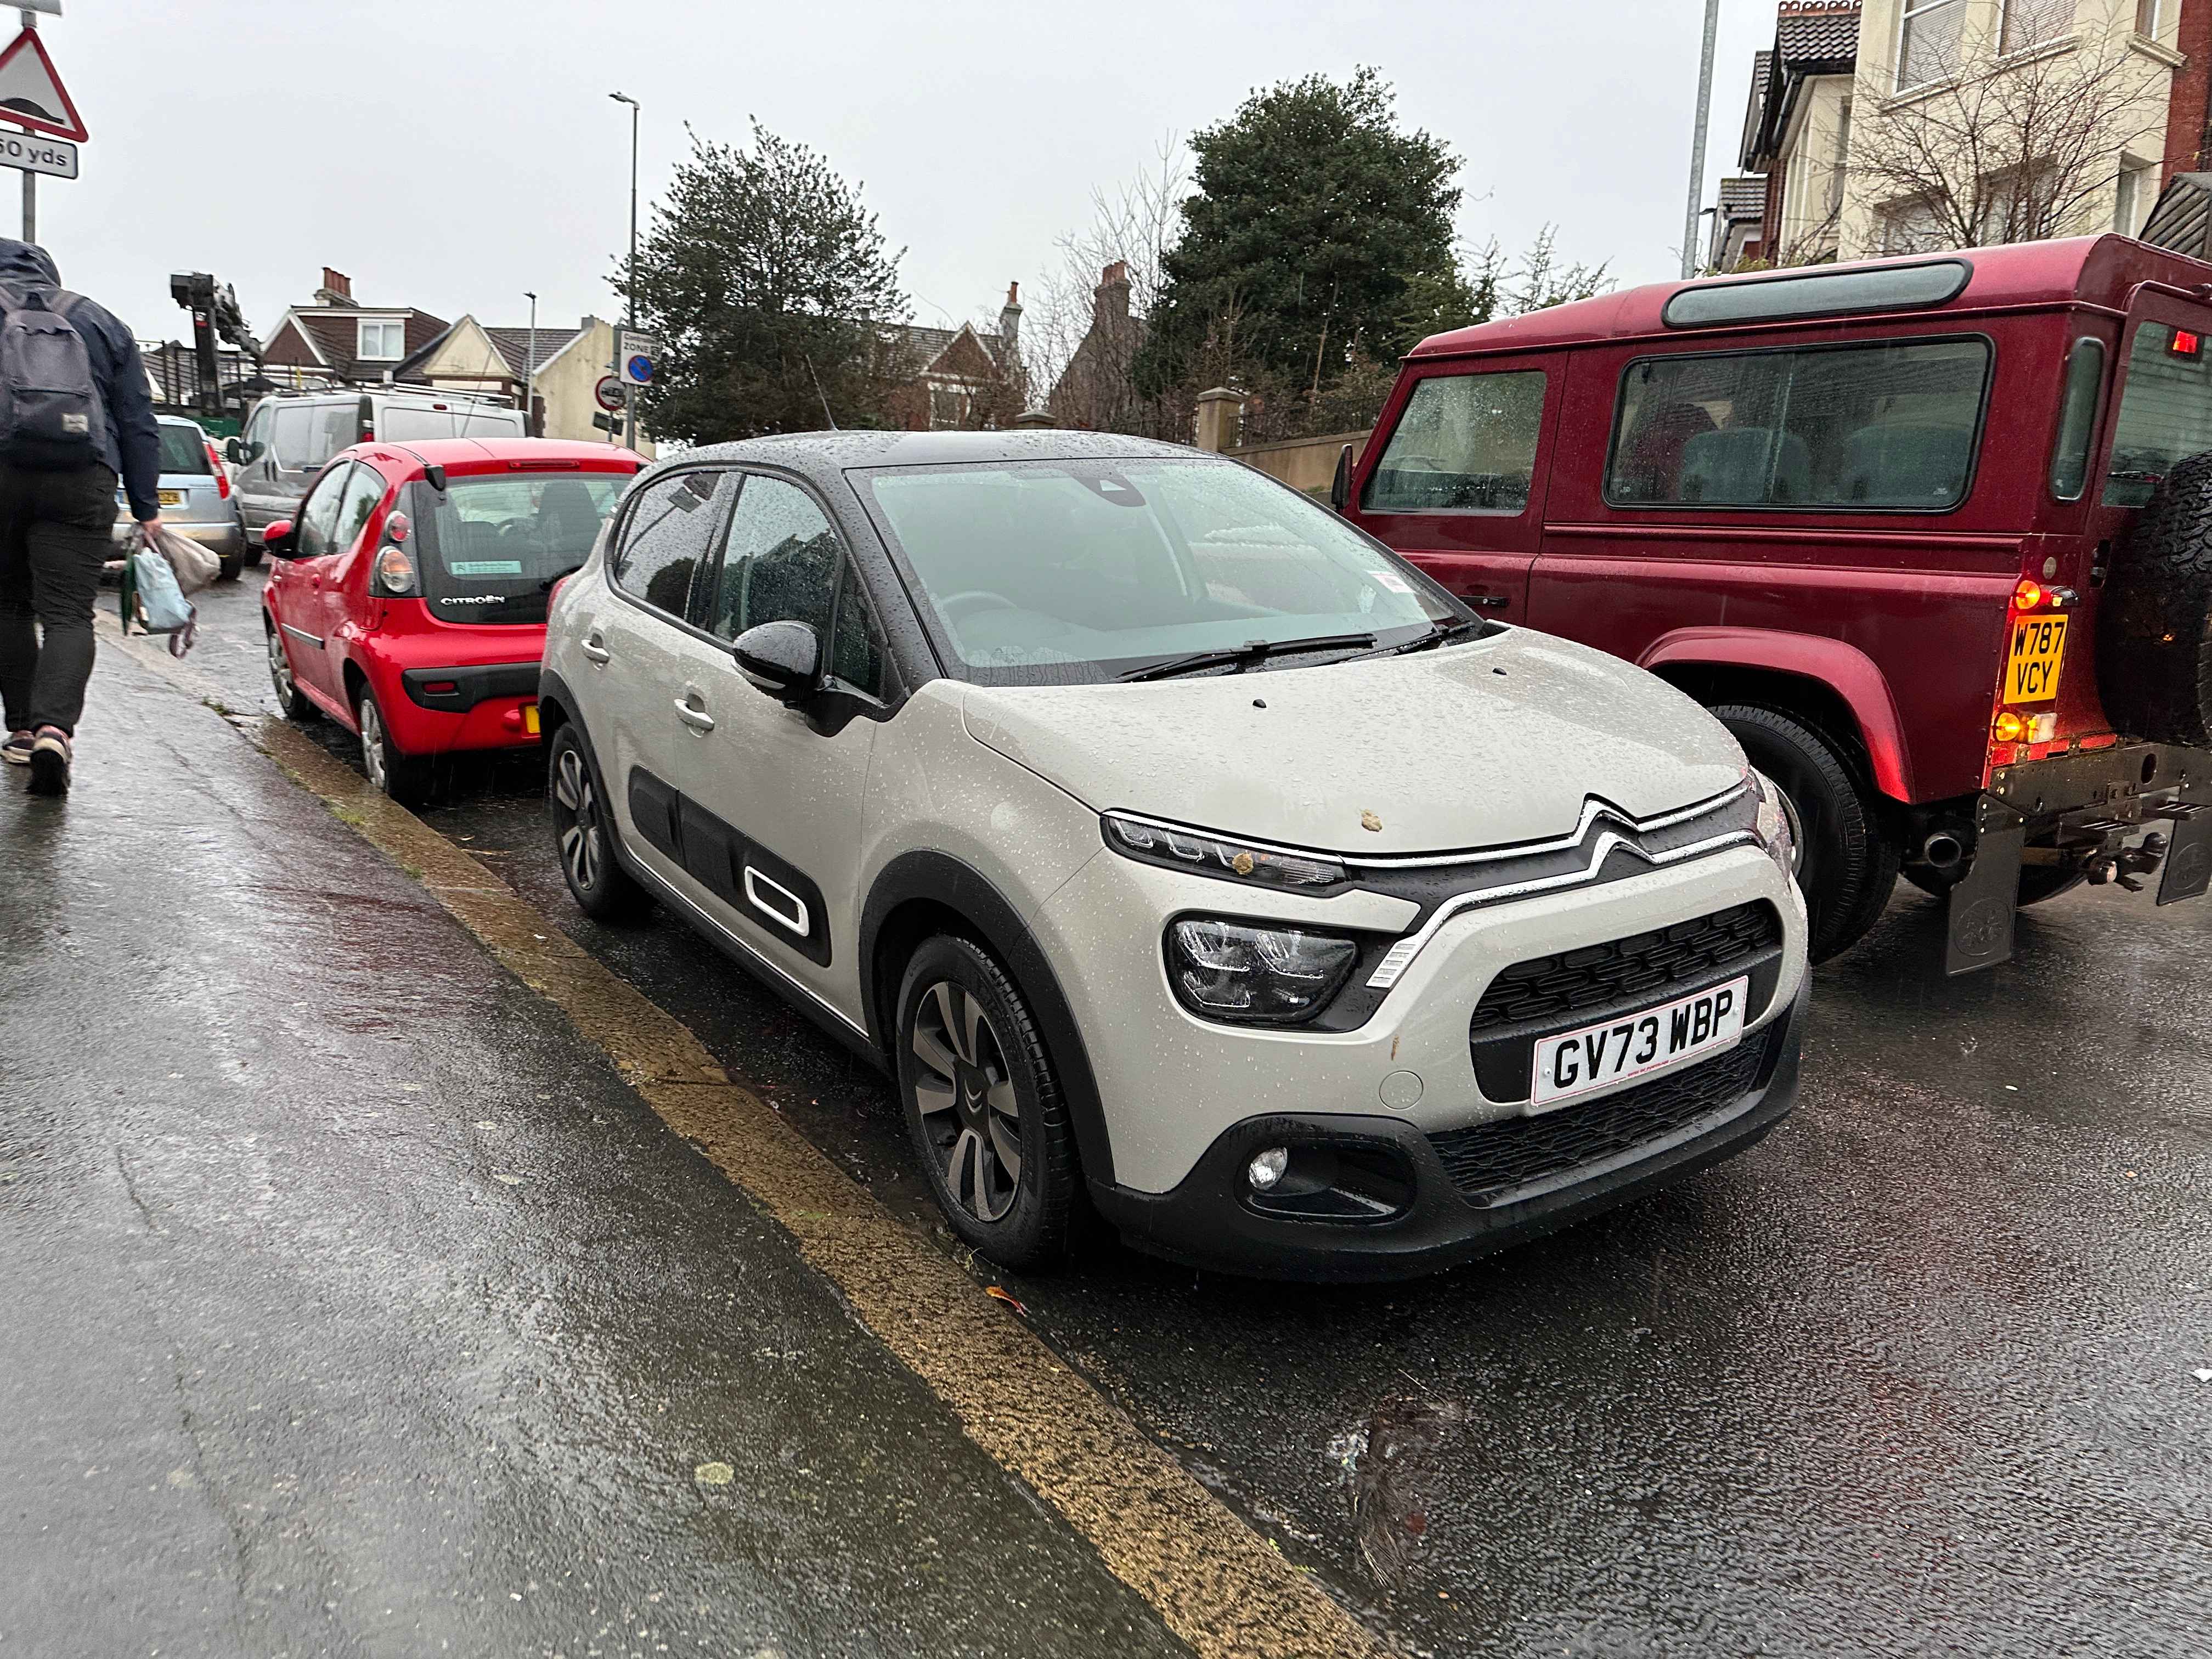 Photograph of GV73 WBP - a Grey Citroen C3 parked in Hollingdean by a non-resident who uses the local area as part of their Brighton commute. The third of four photographs supplied by the residents of Hollingdean.